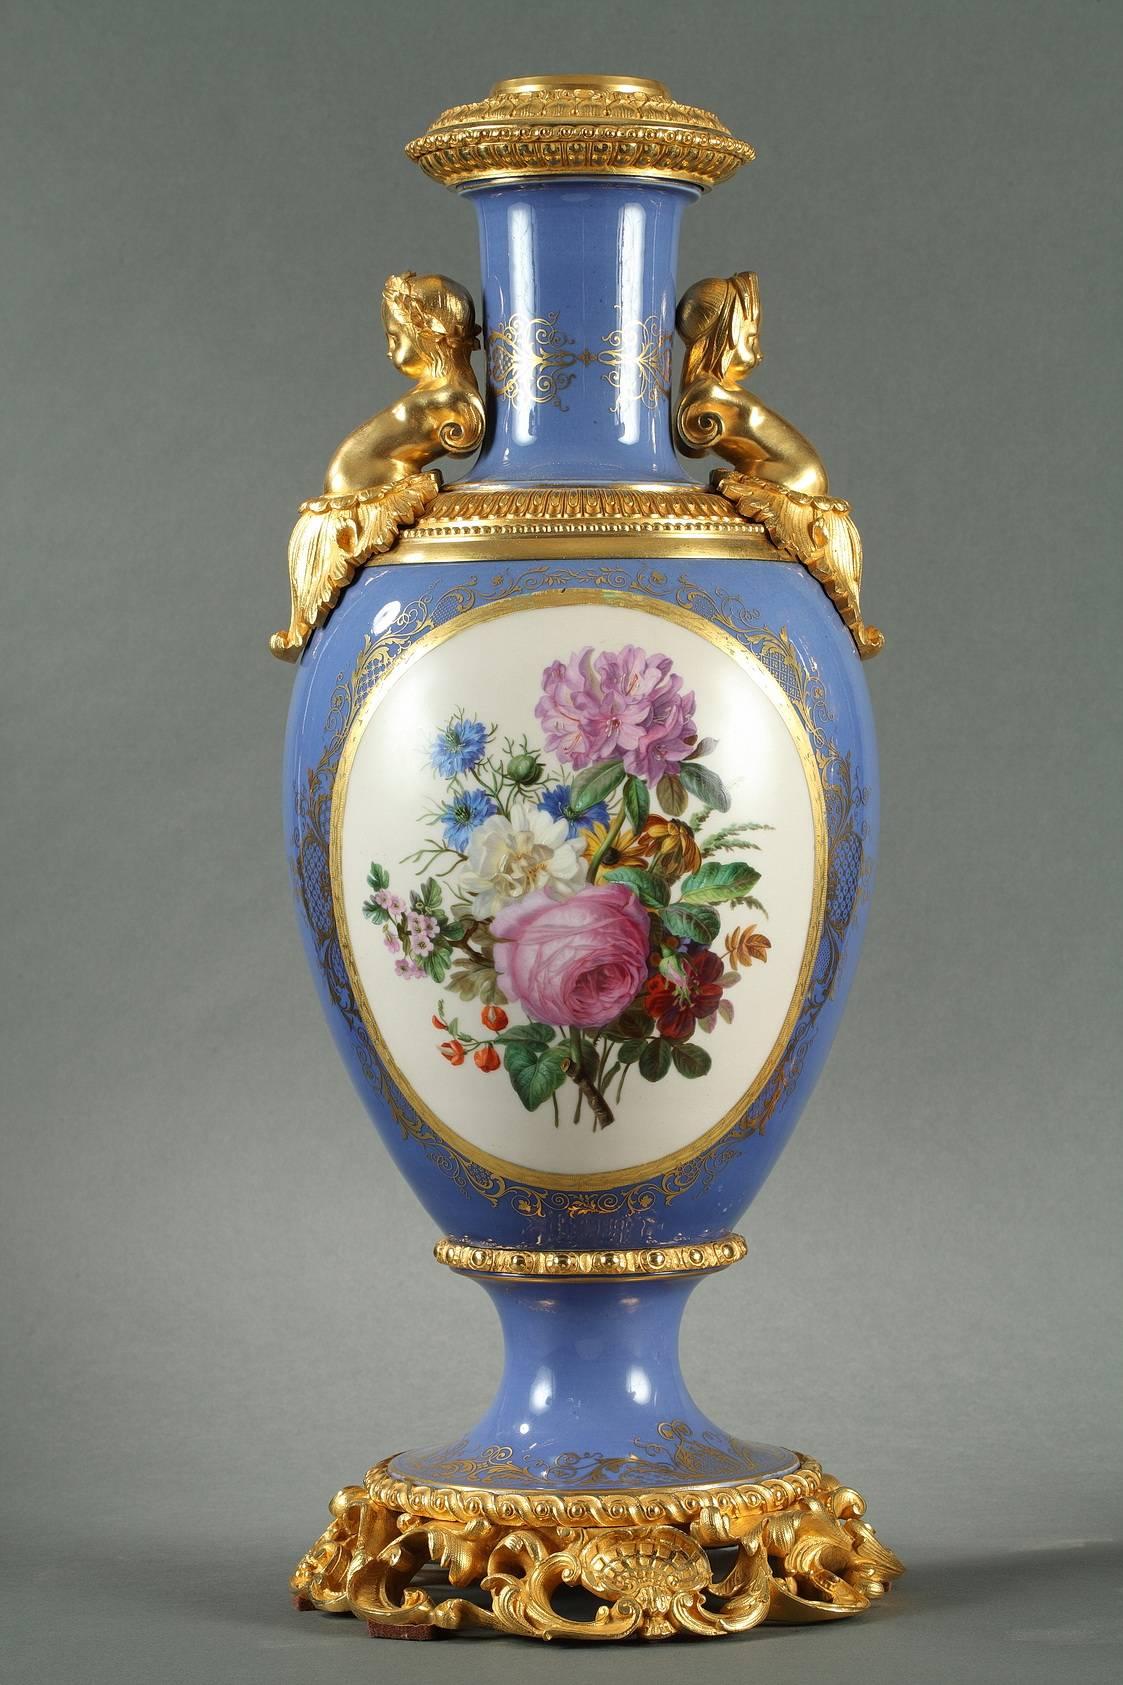 Pair of porcelain, oval vases with a sky blue background and gilt bronze. On the paunch of the vases are large, multicolored cartouches framed in gold featuring panoramic landscapes on one side and bouquets of flowers on a white background on the